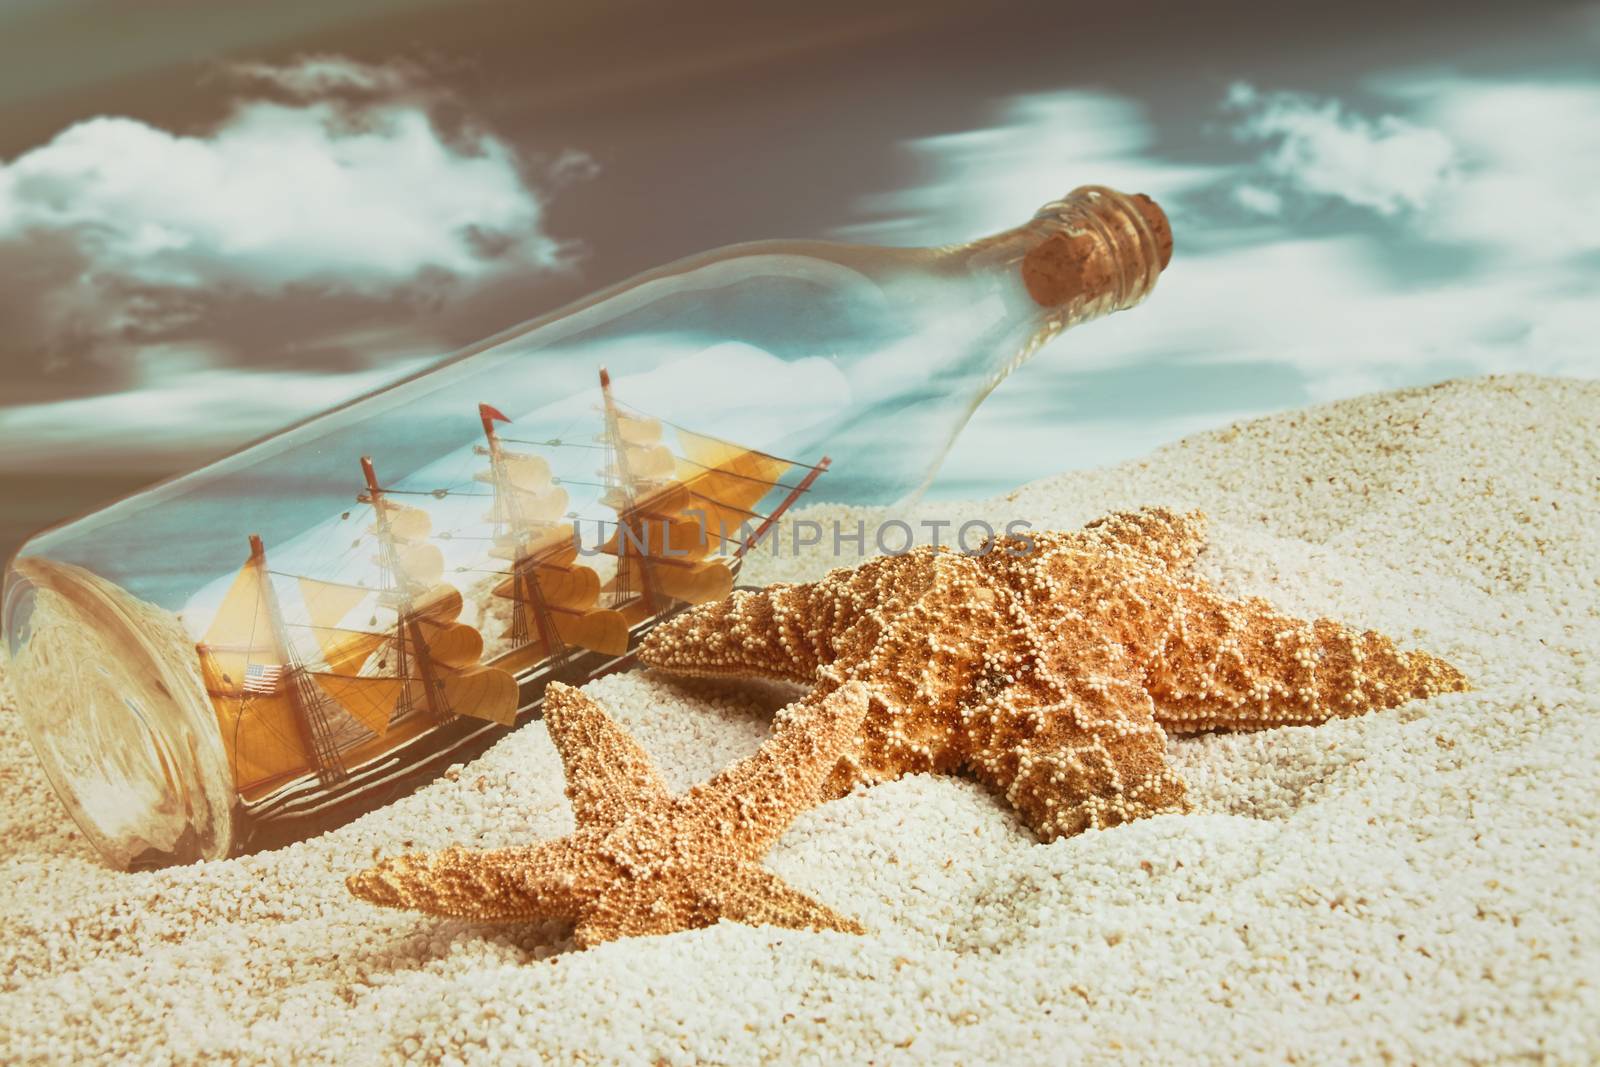 Bottle with ship inside on the beach by Sandralise